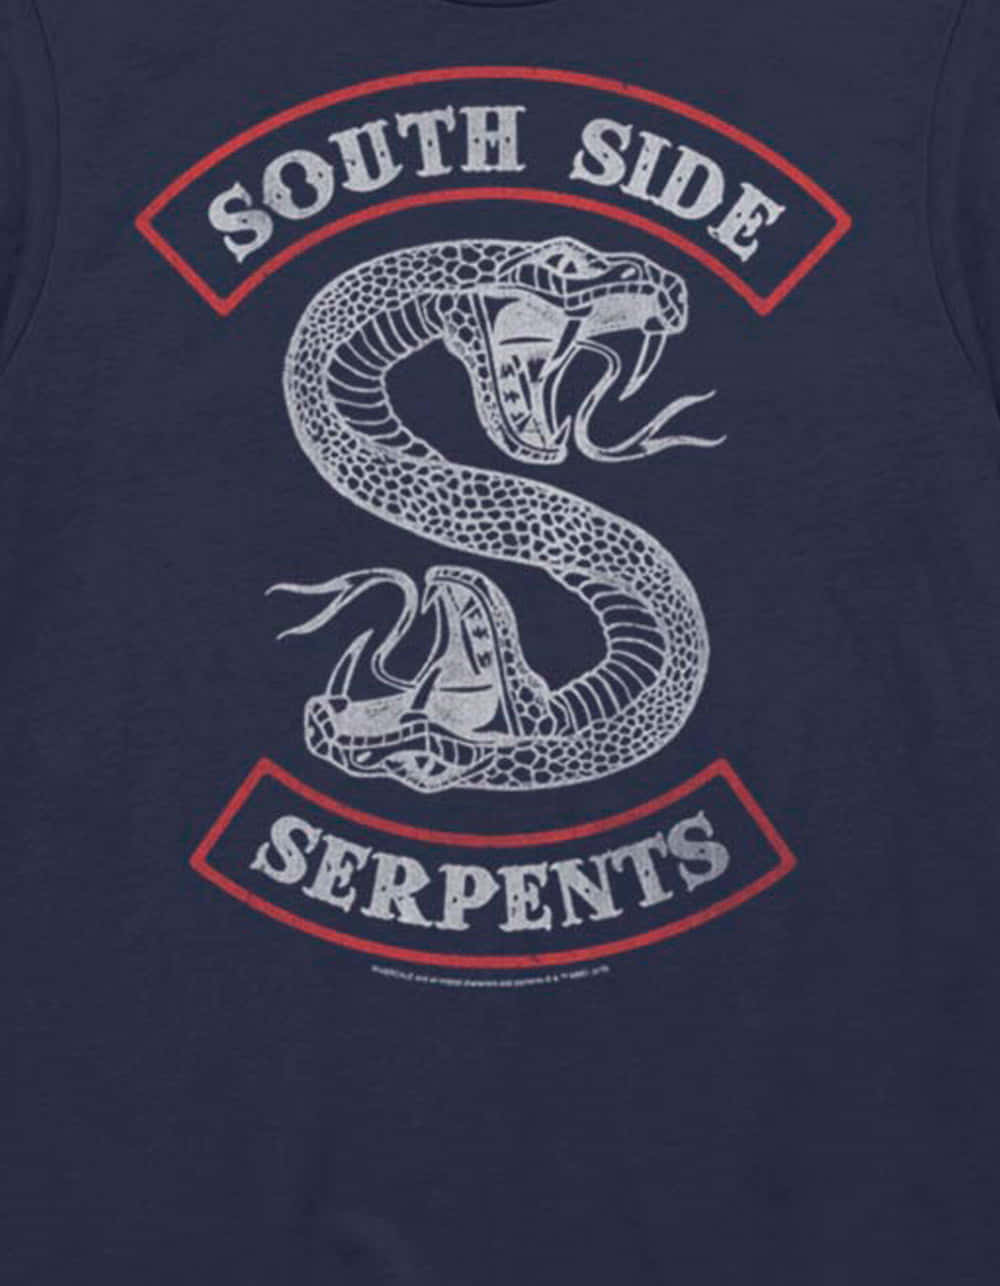 The Southside Serpents are an iconic gang in Riverdale. Wallpaper